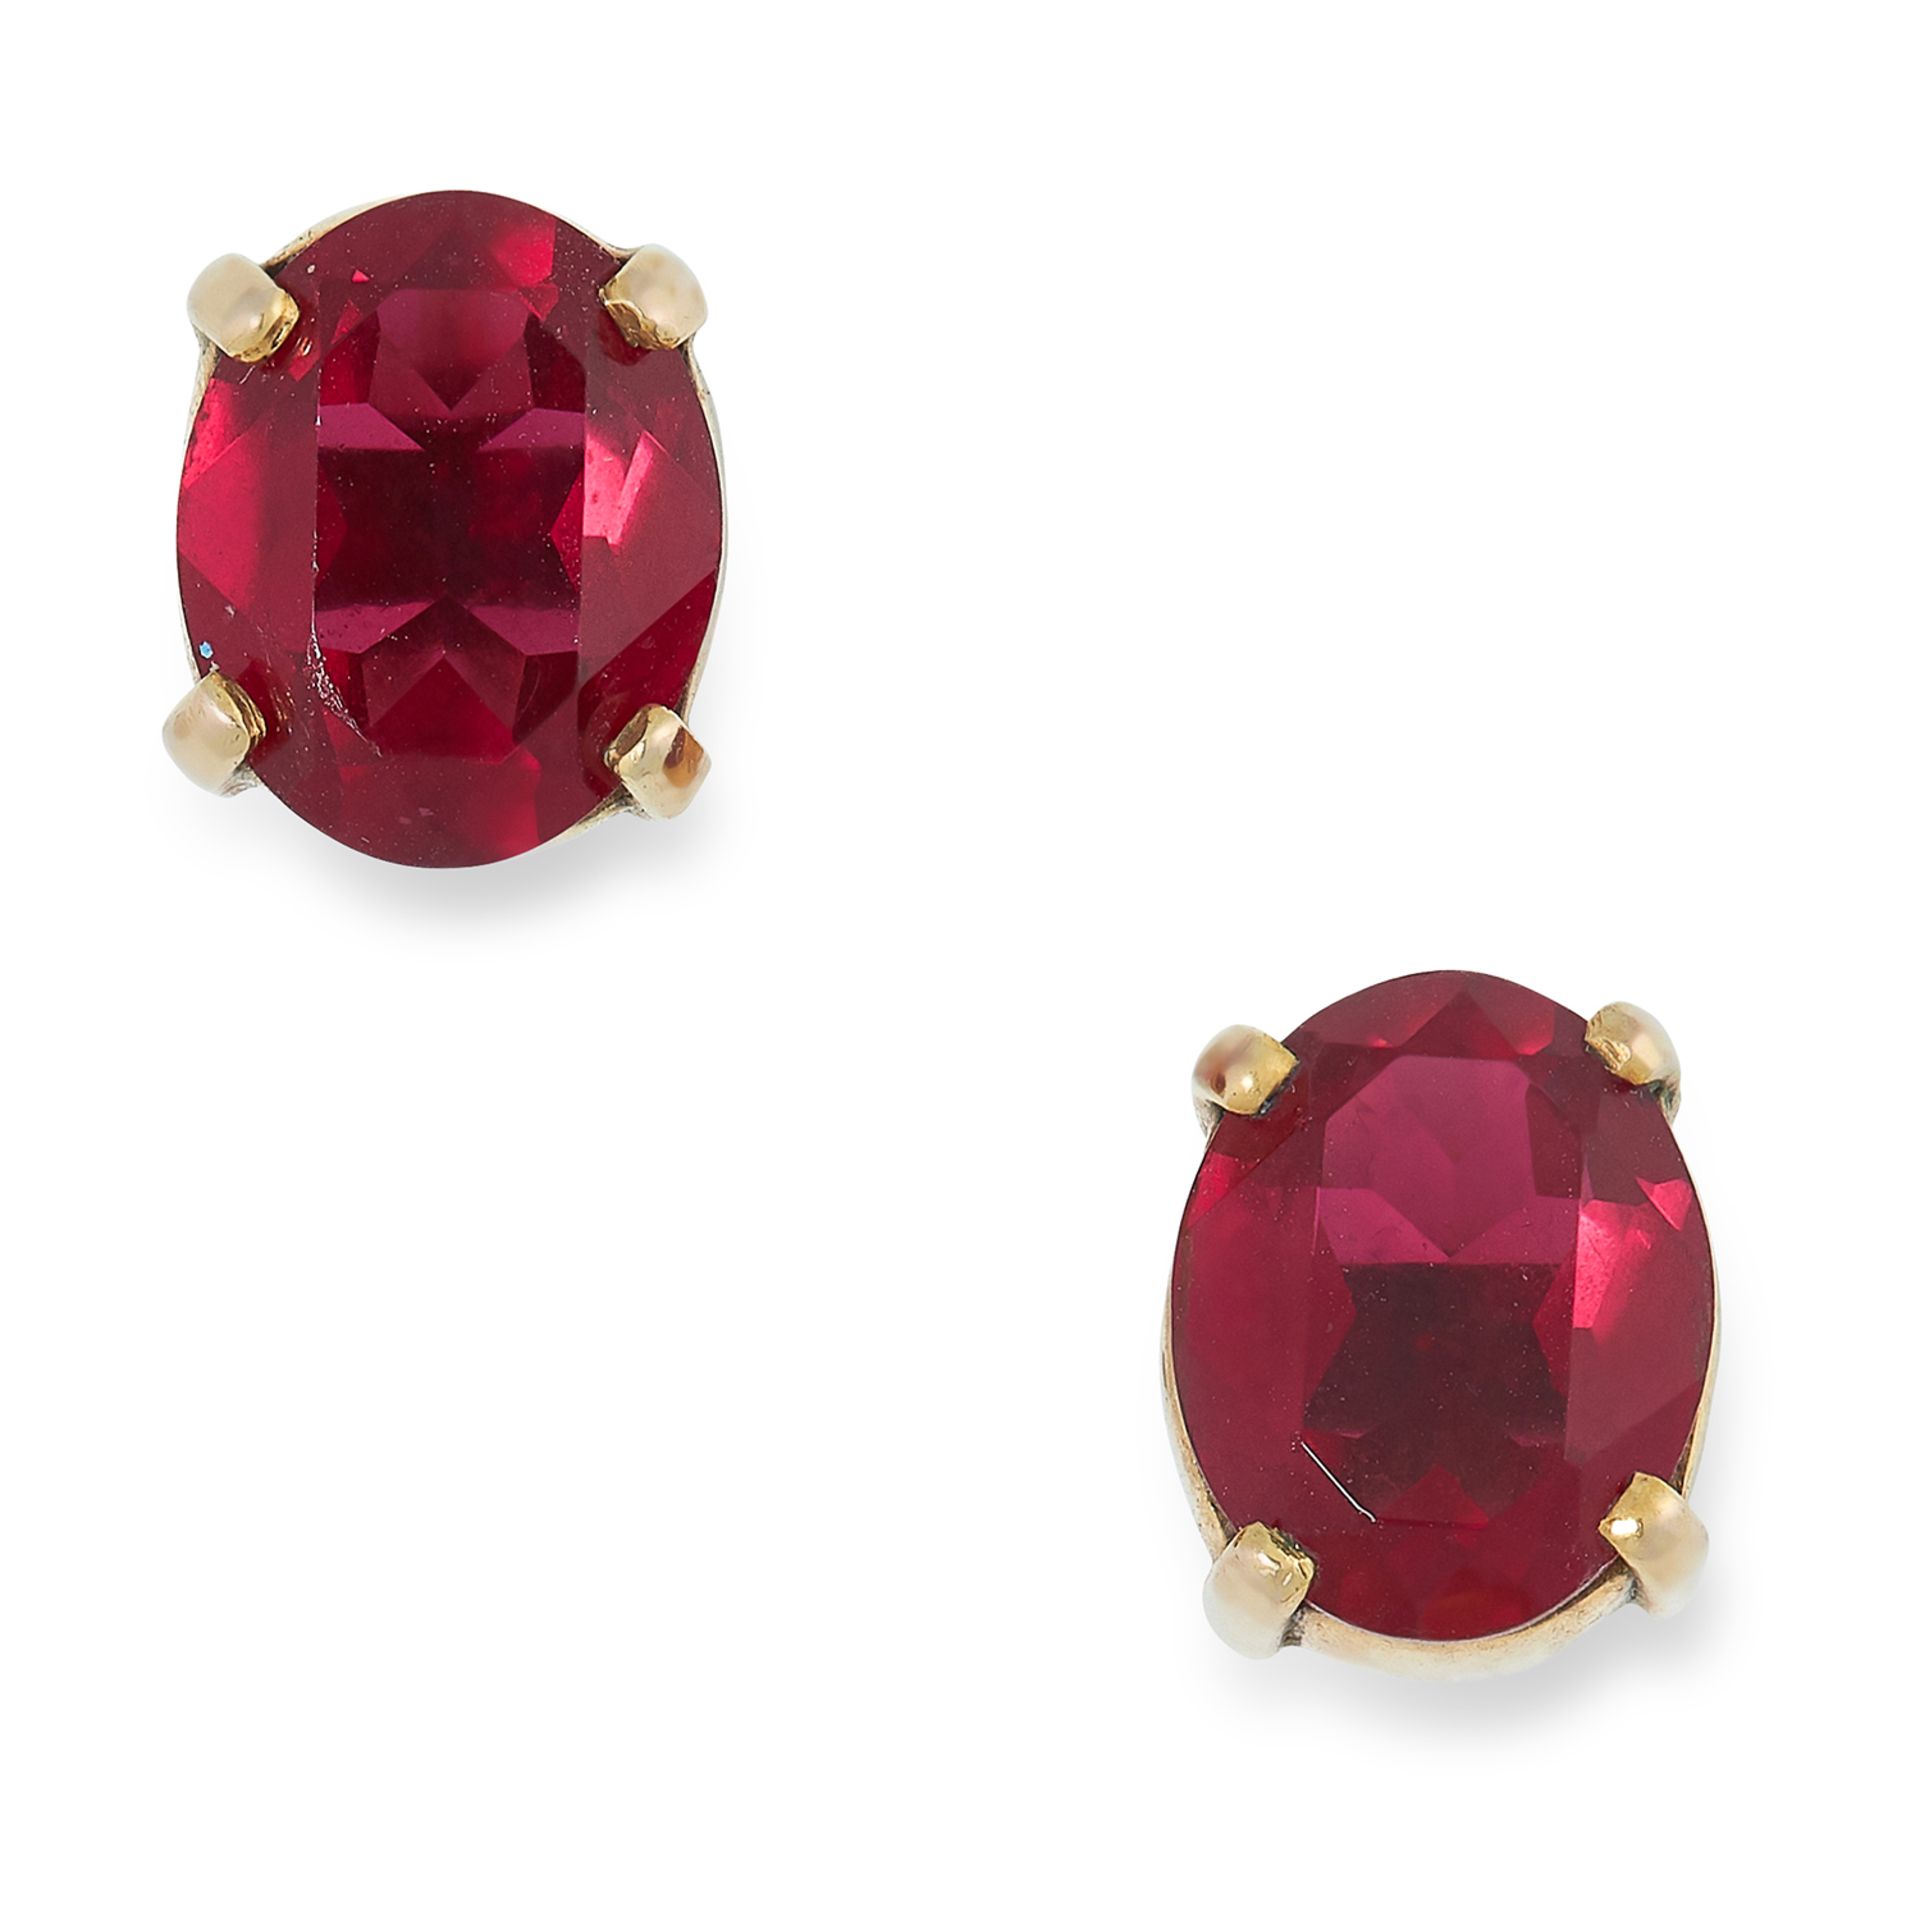 RED CRYSTAL STUD EARRINGS set with an oval faceted red crystal, 0.9cm, 3.5g.